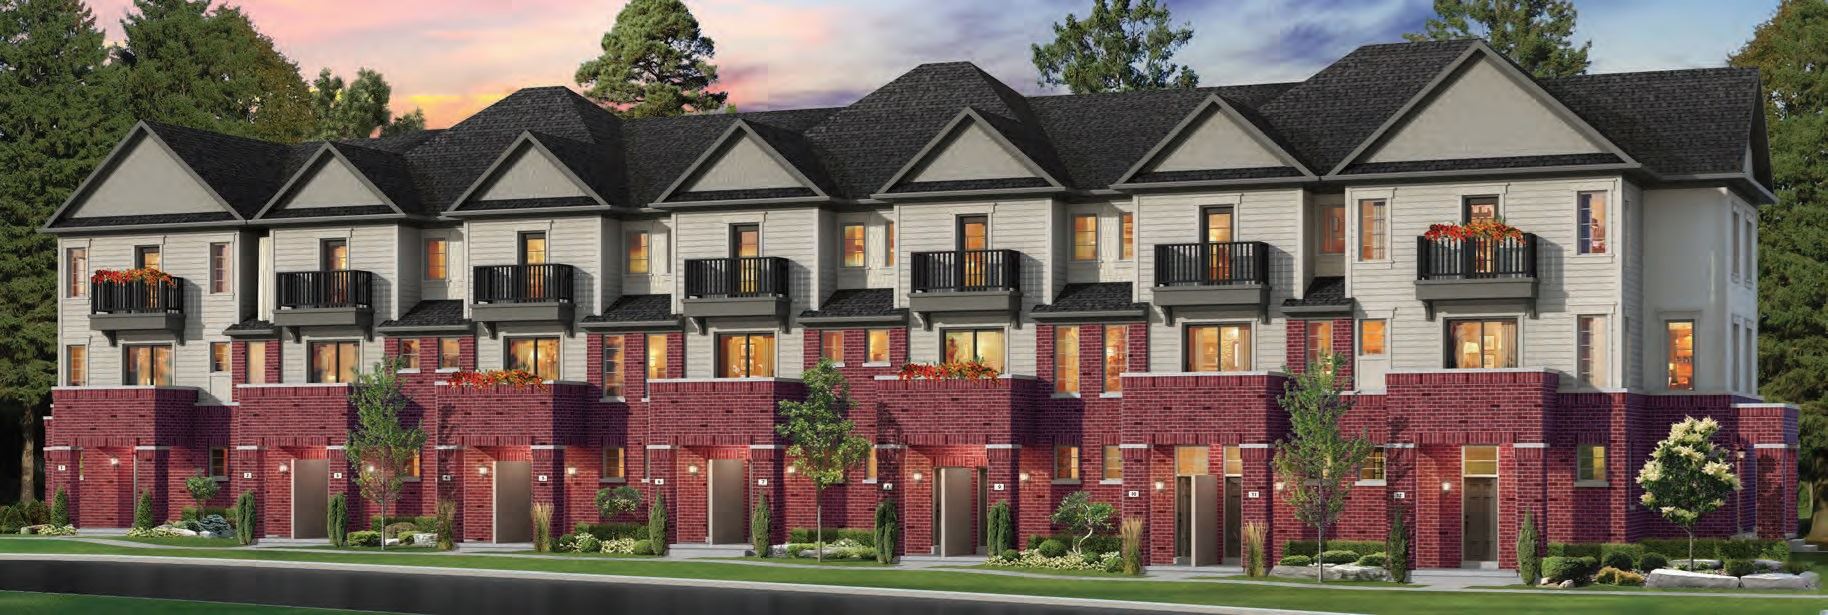 the-vale-townhomes-6